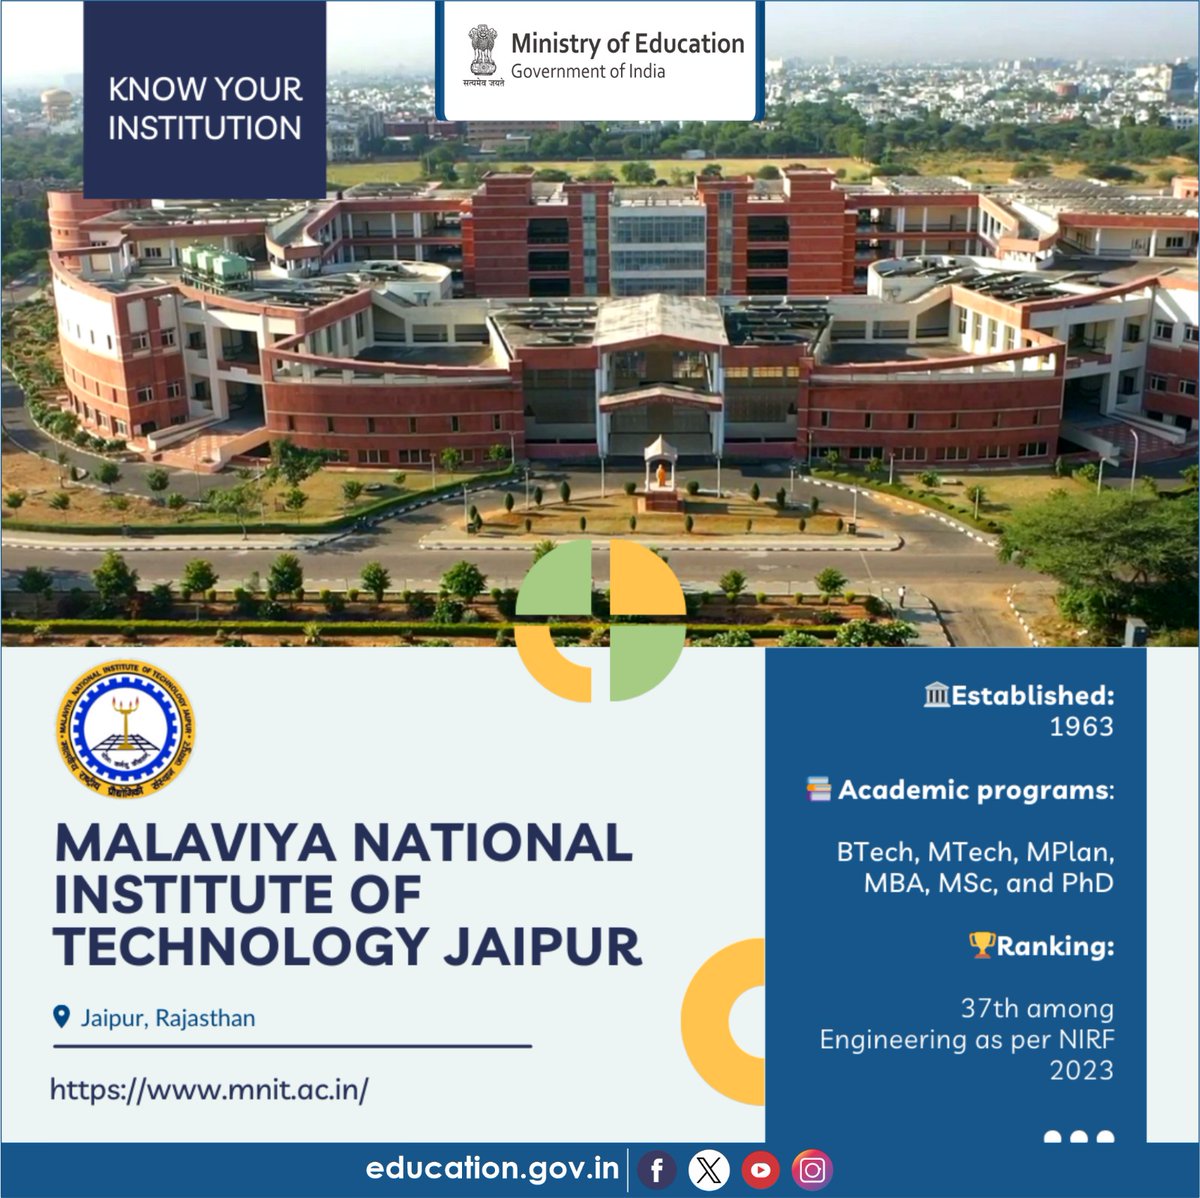 Know about the HEIs of India! Malviya National Information Technology (MNIT), established in 1963 as Malaviya Regional Engineering College Jaipur, was given the status of National Institute of Technology in 2002. It was recognized as the Institute of National Importance in 2007.